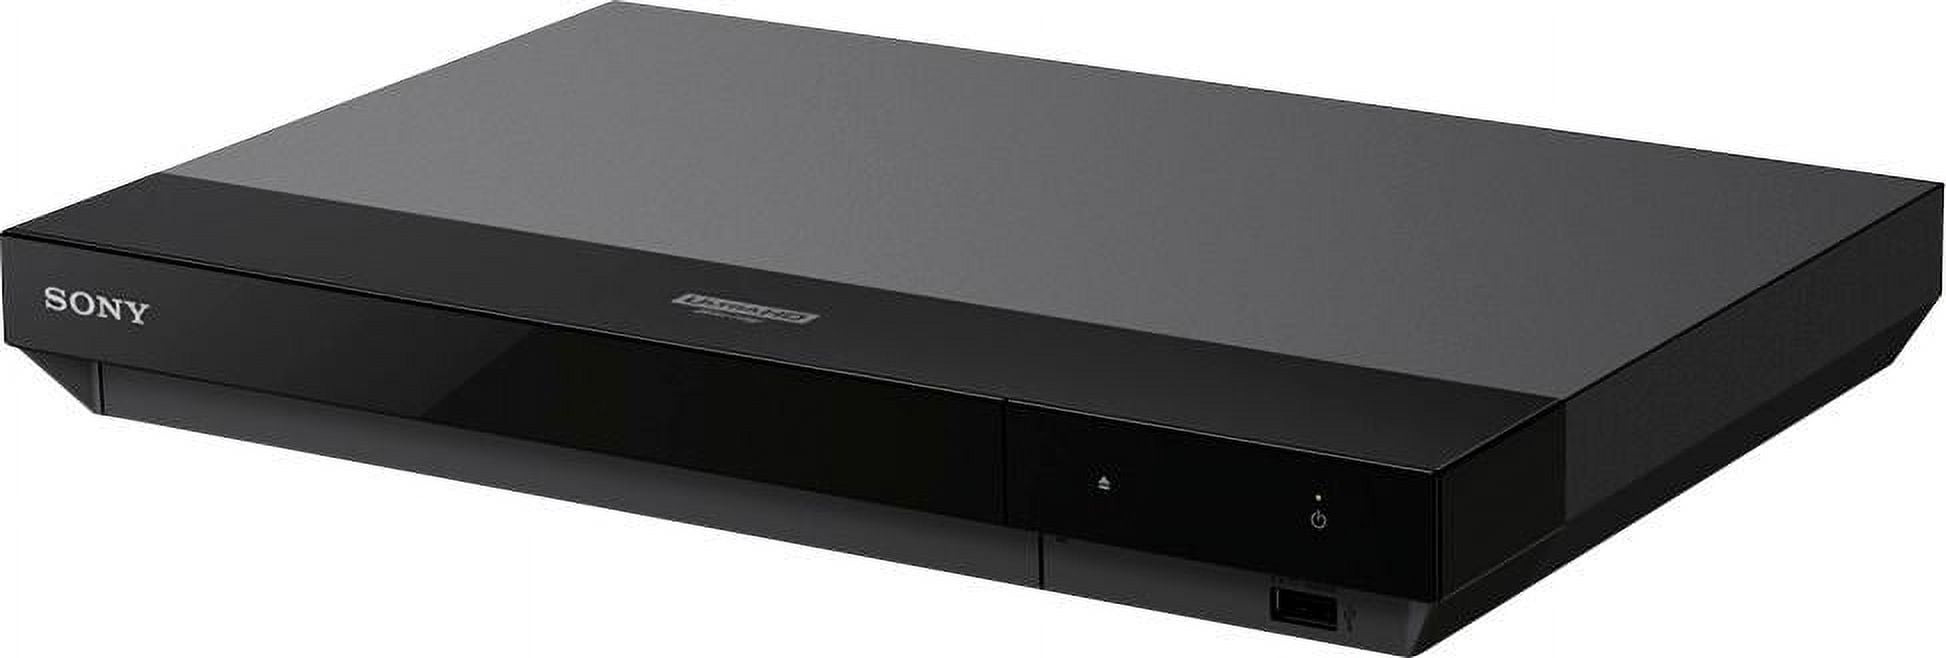 OPPO Digital - 4K Ultra HD Blu-ray Players - Buy Direct from the